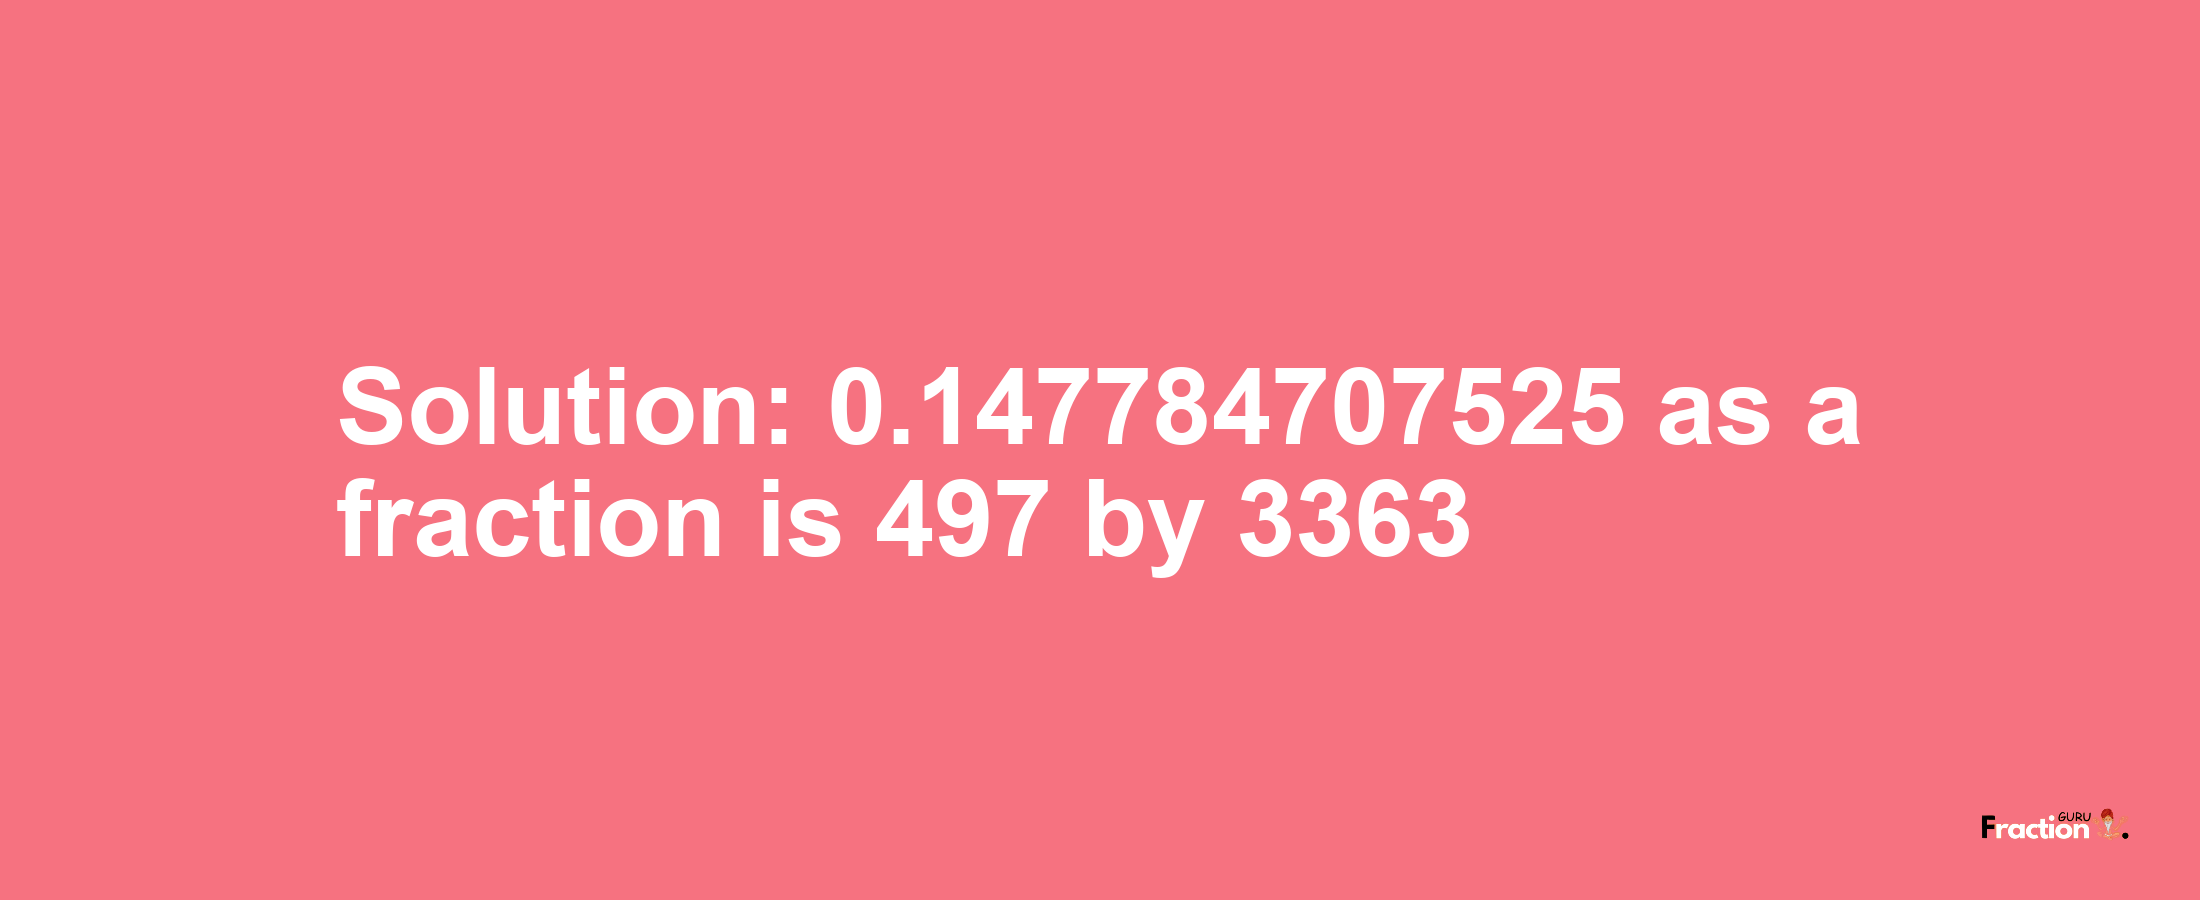 Solution:0.147784707525 as a fraction is 497/3363